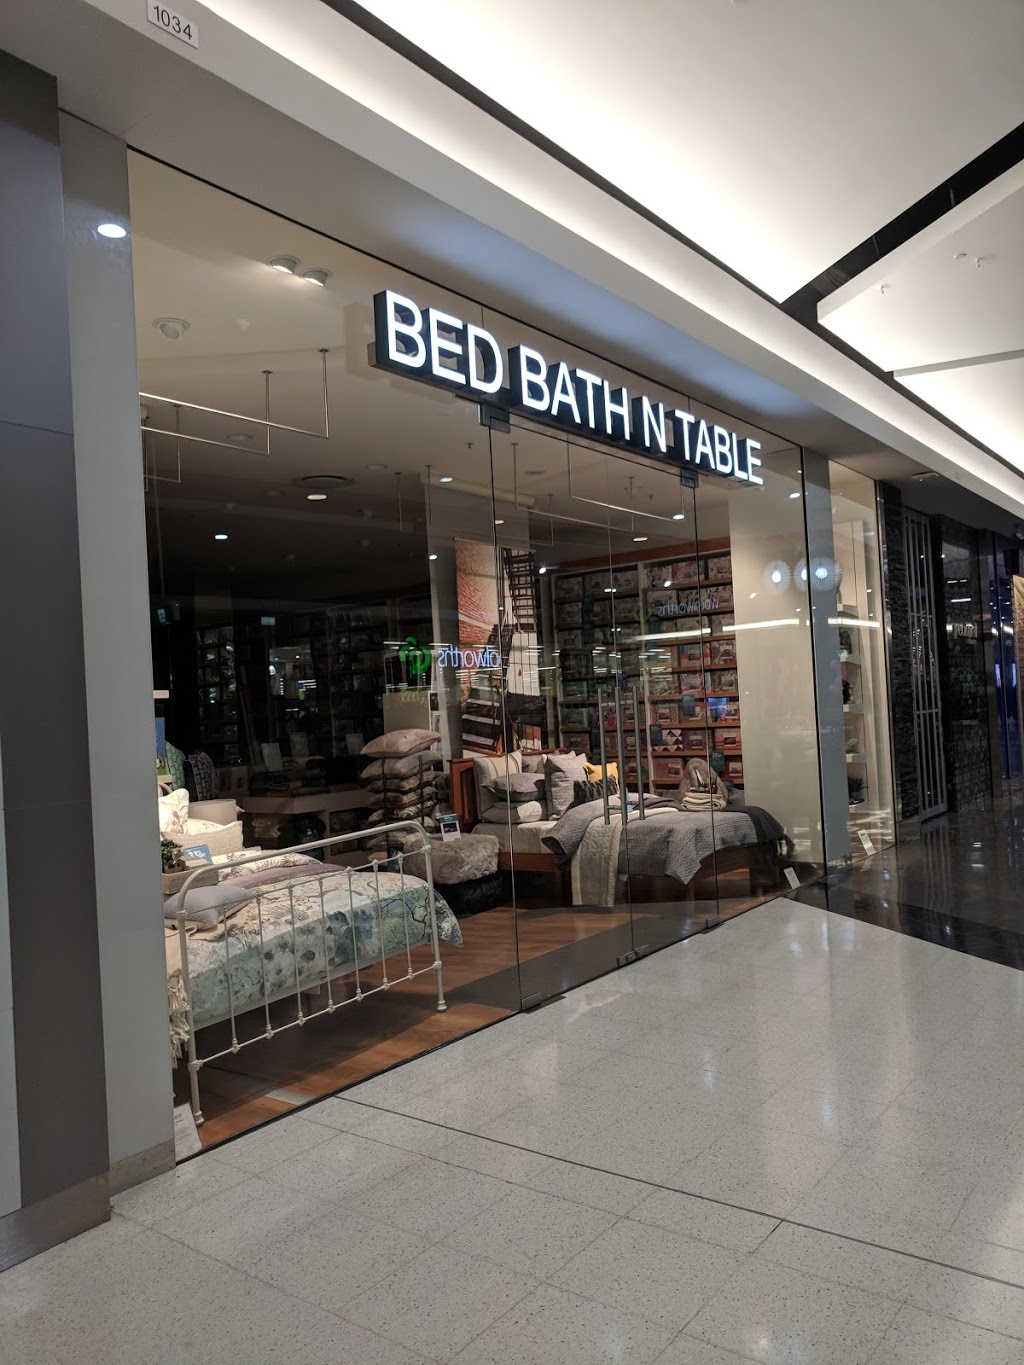 Bed Bath N' Table Merrylands (Stockland Merrylands Shopping Centre Shop 1034) Opening Hours